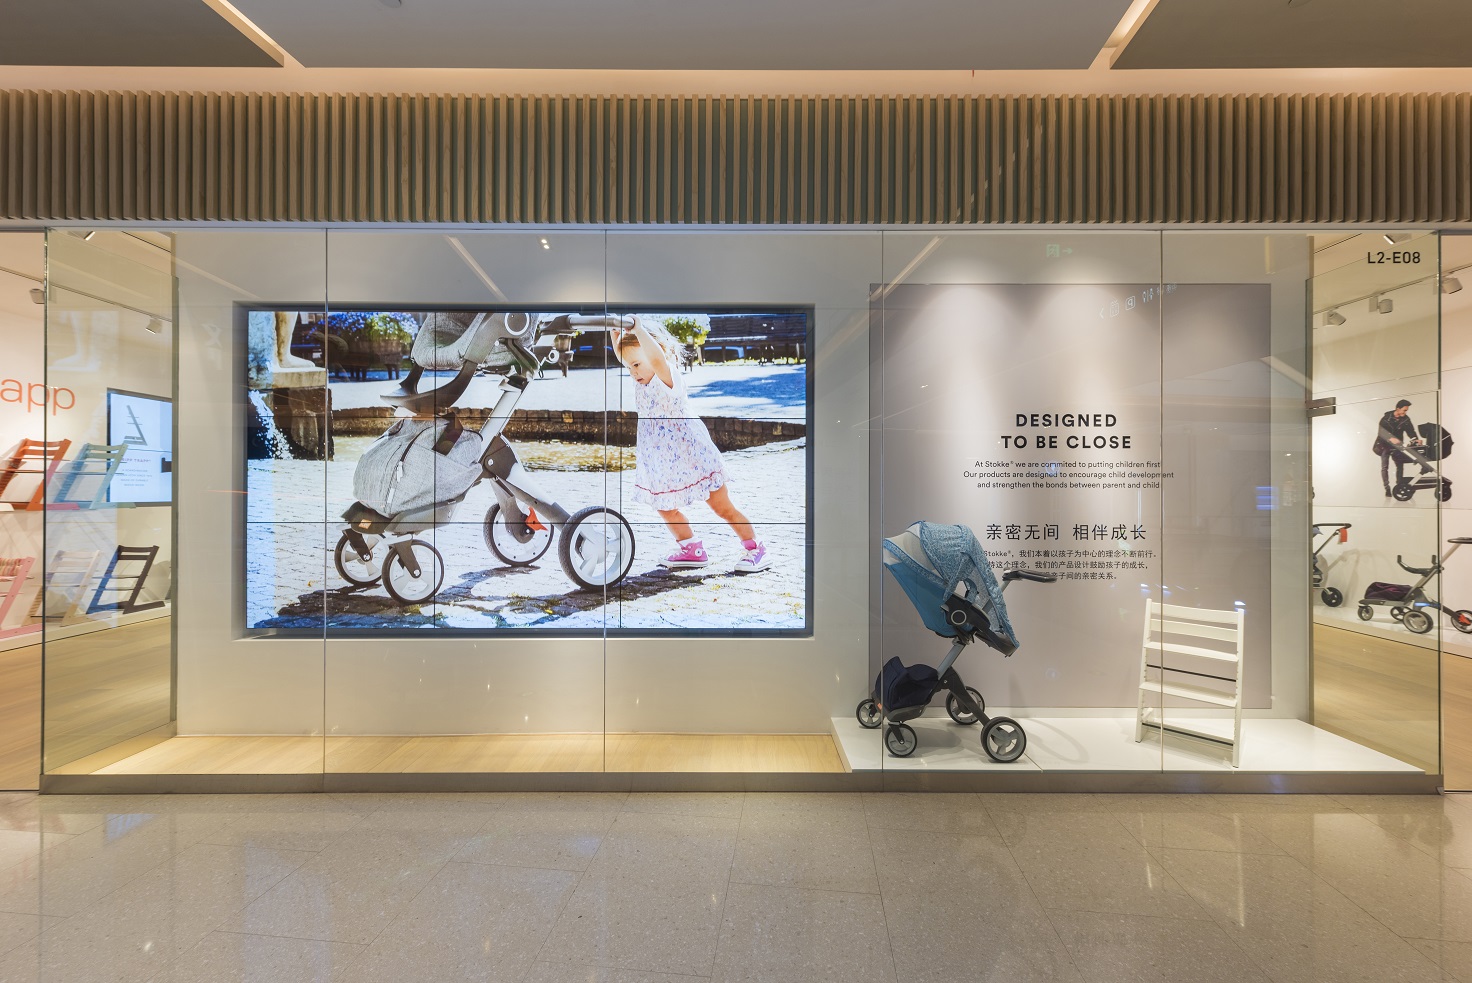 Creating a flagship brand experience for Scandinavian products for children